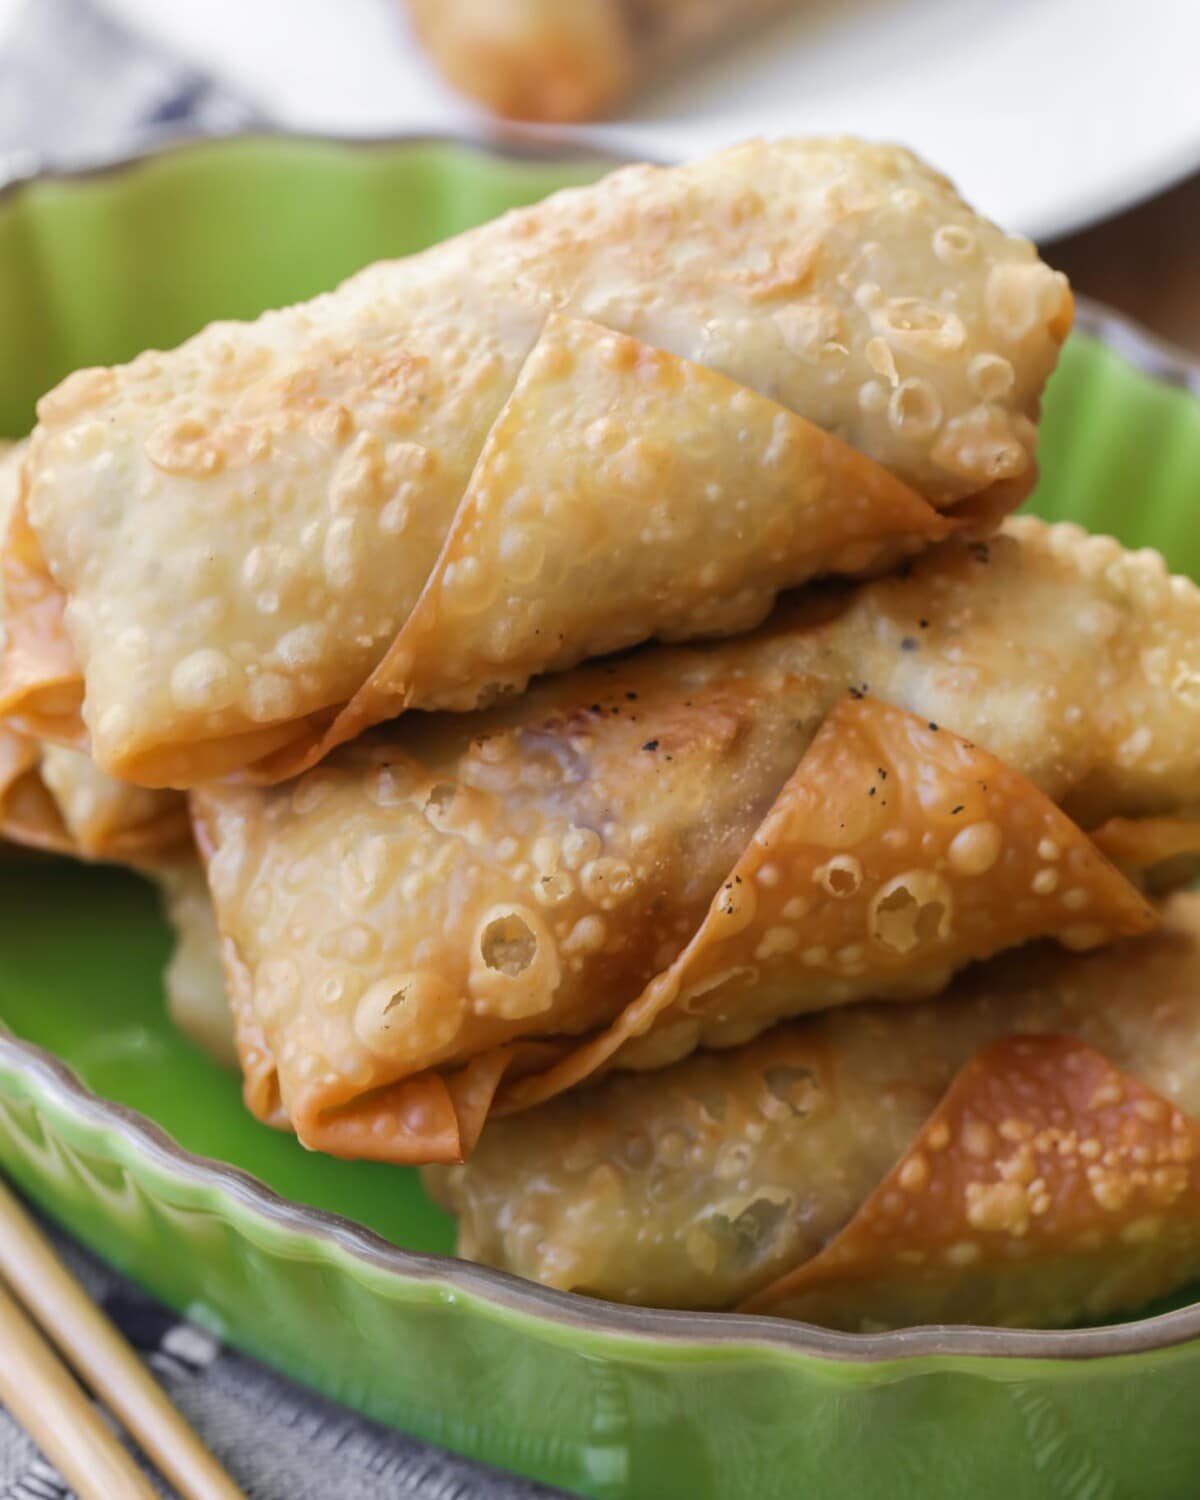 Homemade Egg Roll recipe in a green dish.